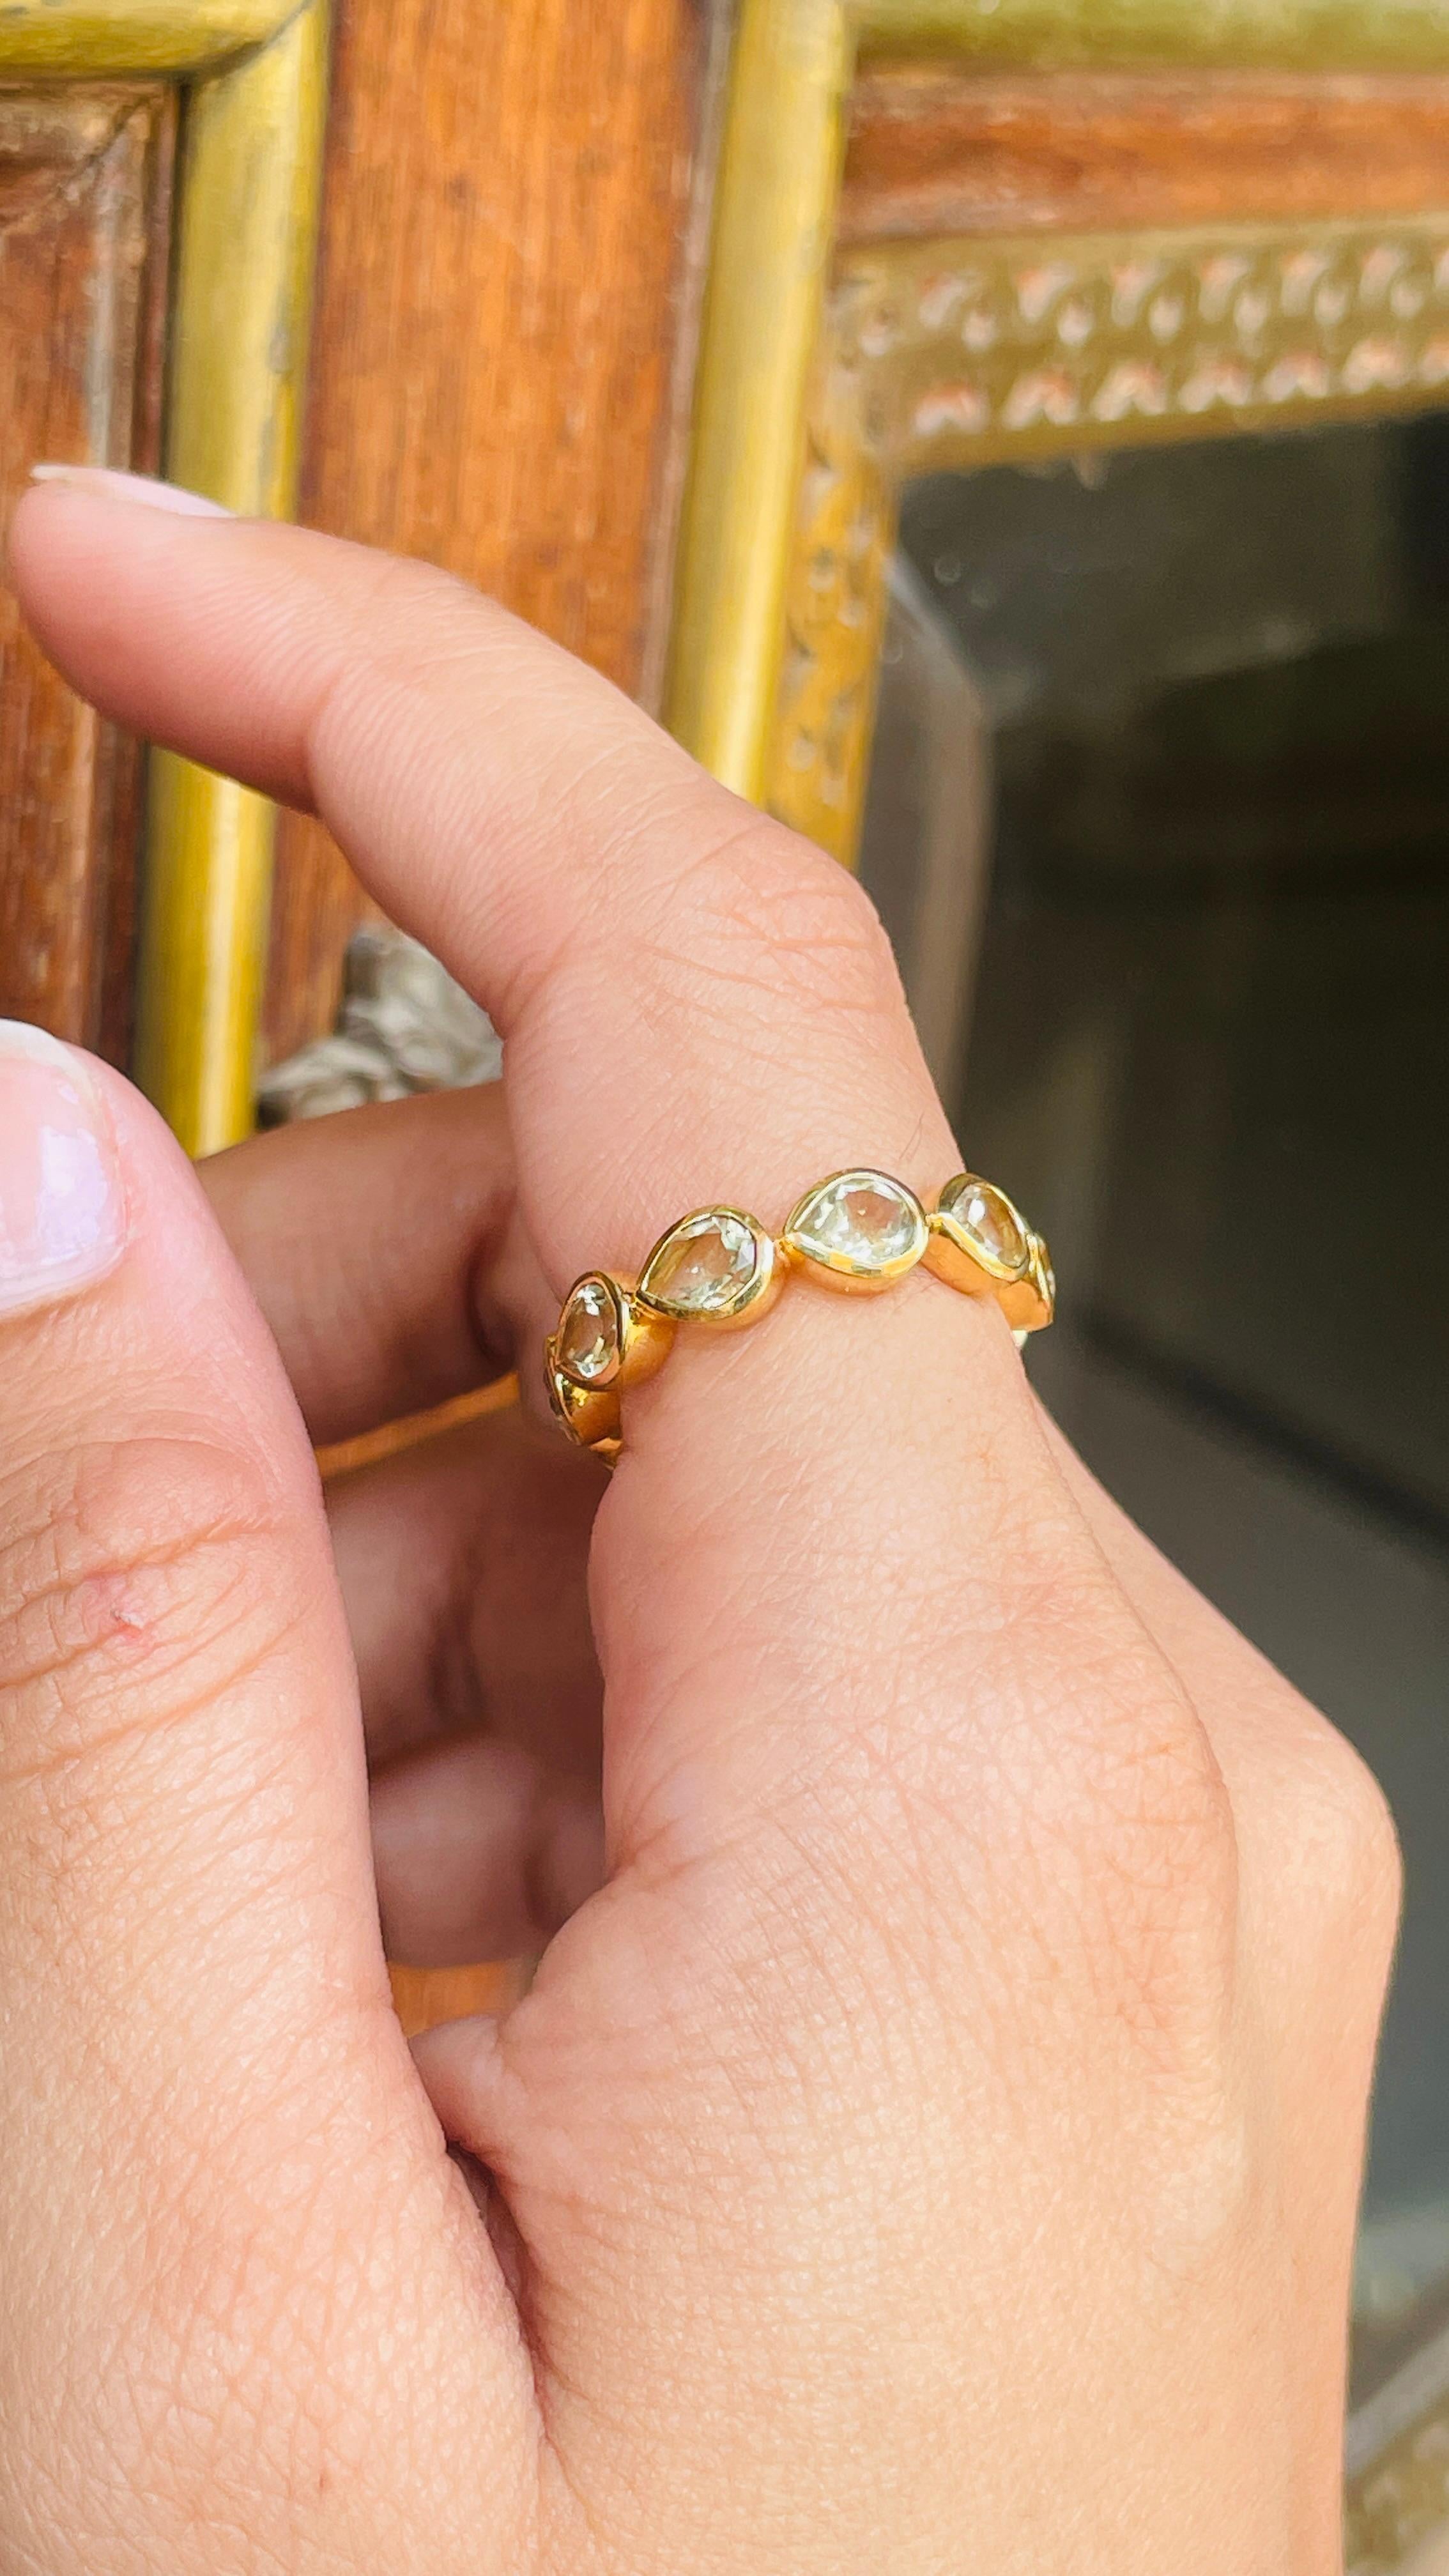 Lemon Topaz Eternity Band Ring in 18K gold symbolizes the everlasting love between a couple. It shows the infinite love you have for your partner. The circular shape represents love which will continue and makes your promises stay forever.
Lemon